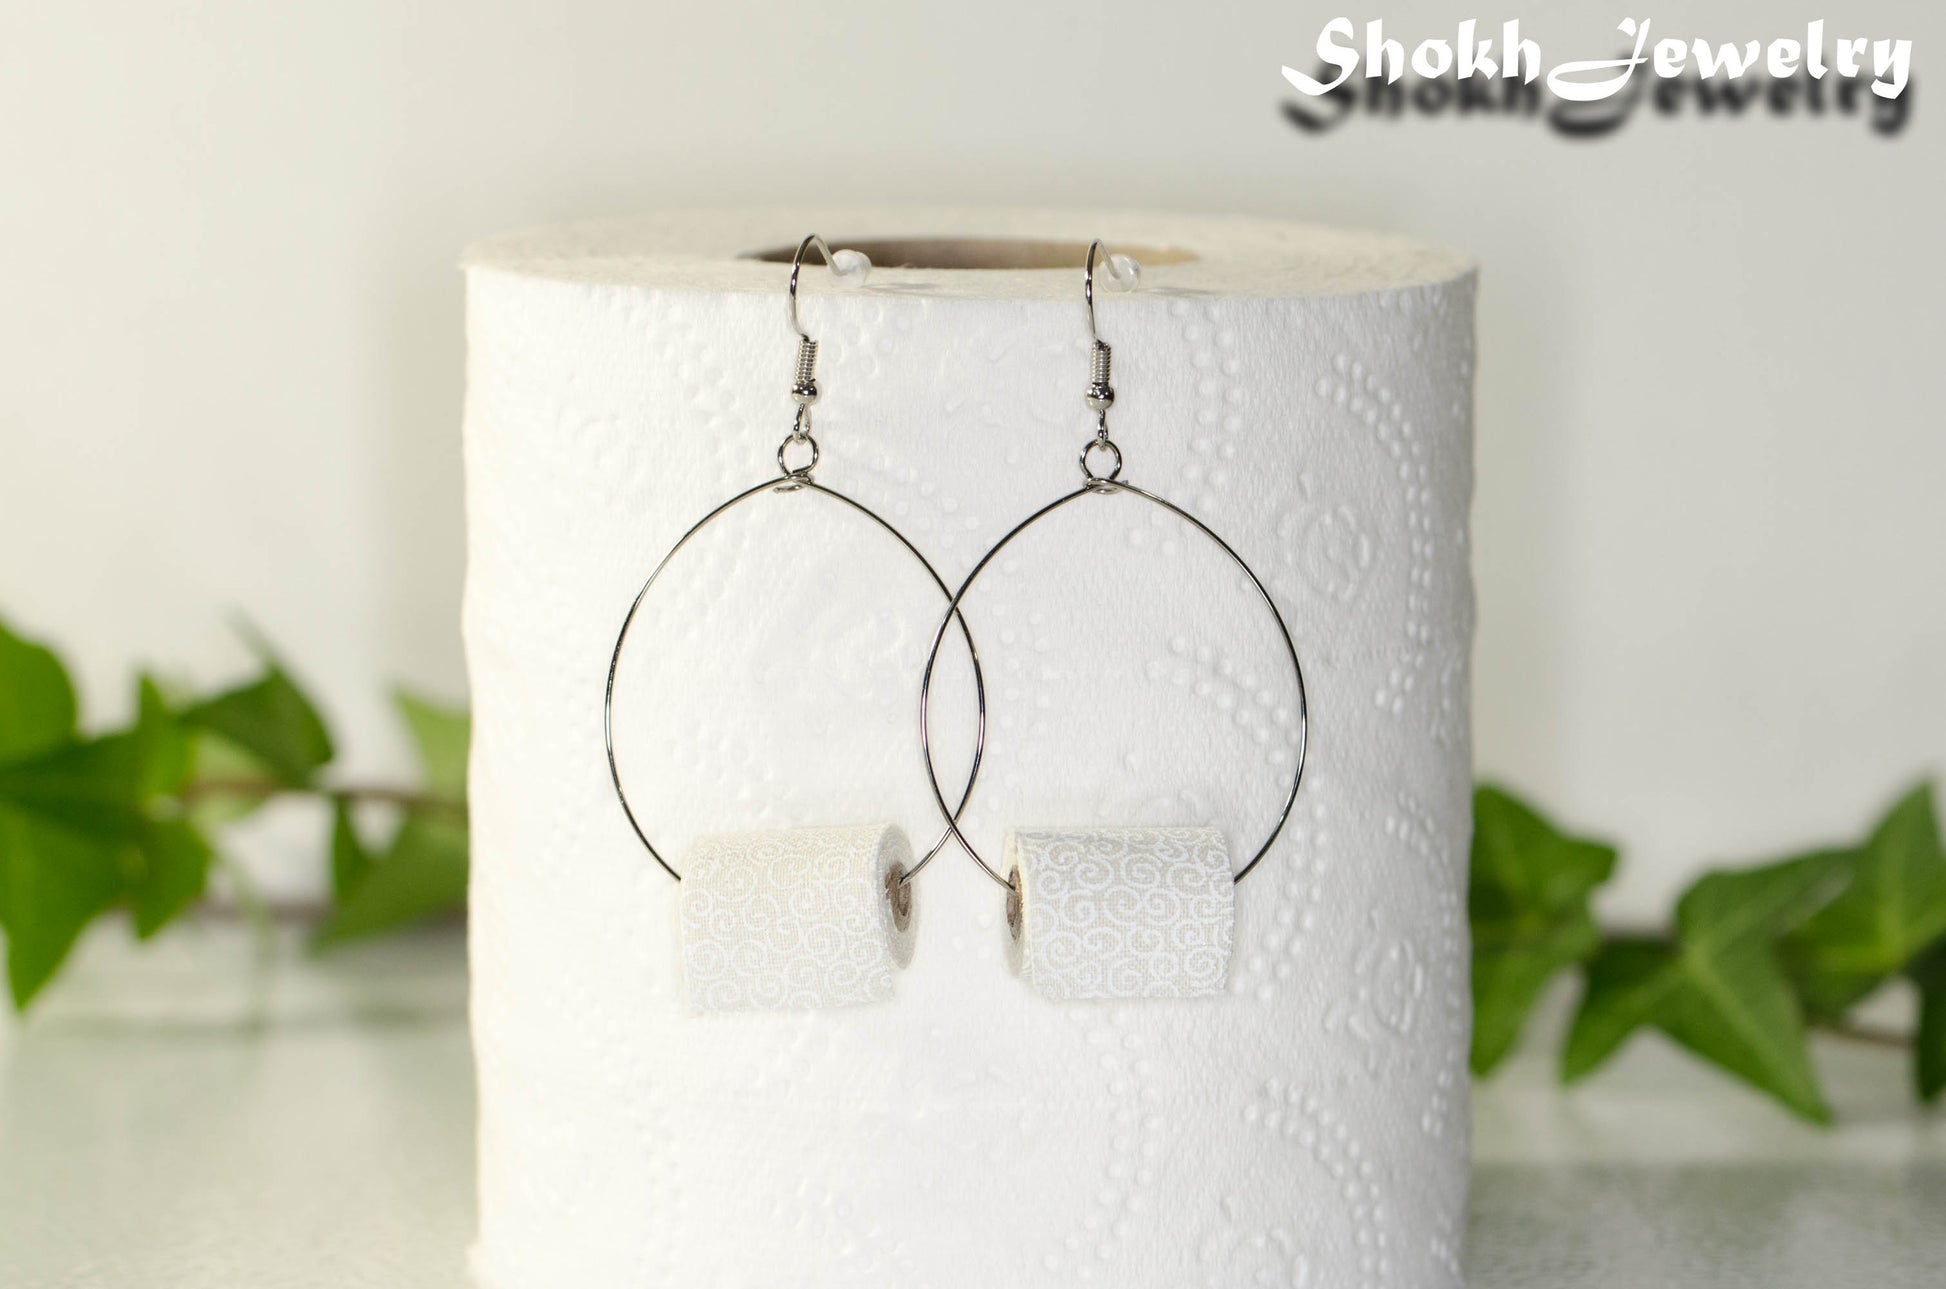 Large Miniature Toilet Paper Roll Earrings displayed on a toilet paper roll.